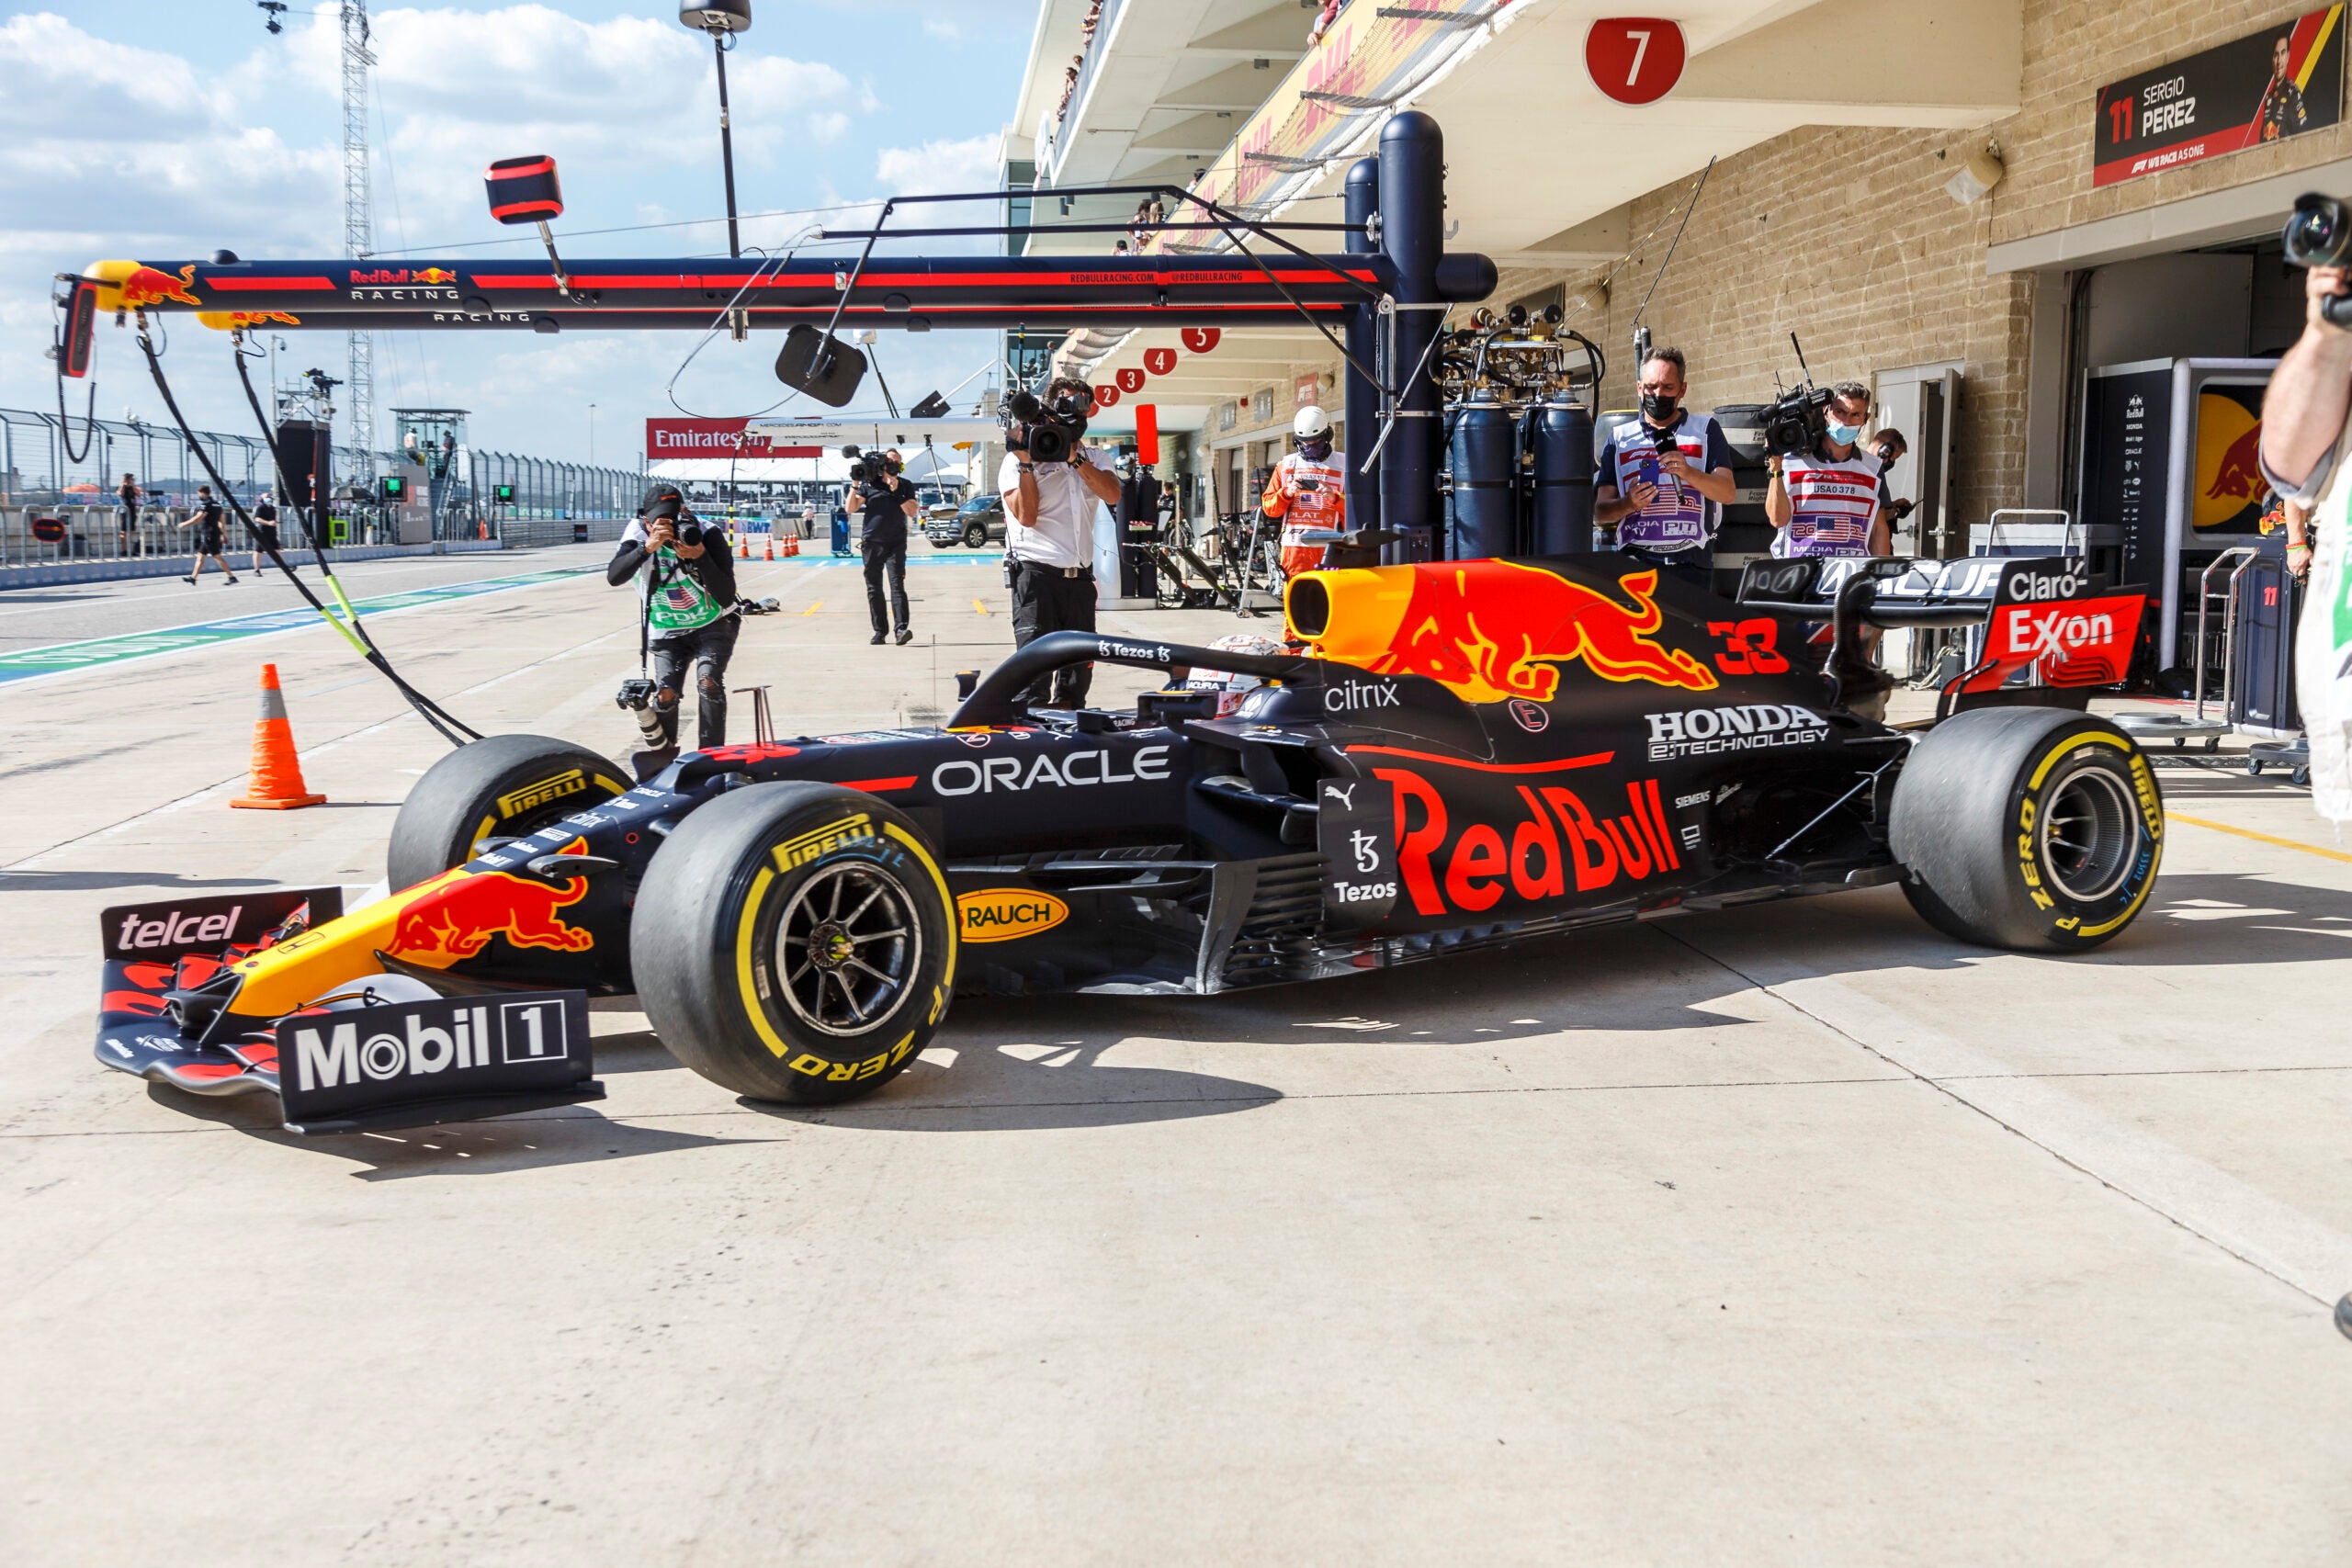 Red Bull-branded Formula One car at Circuit of The Americas in Austin Texas